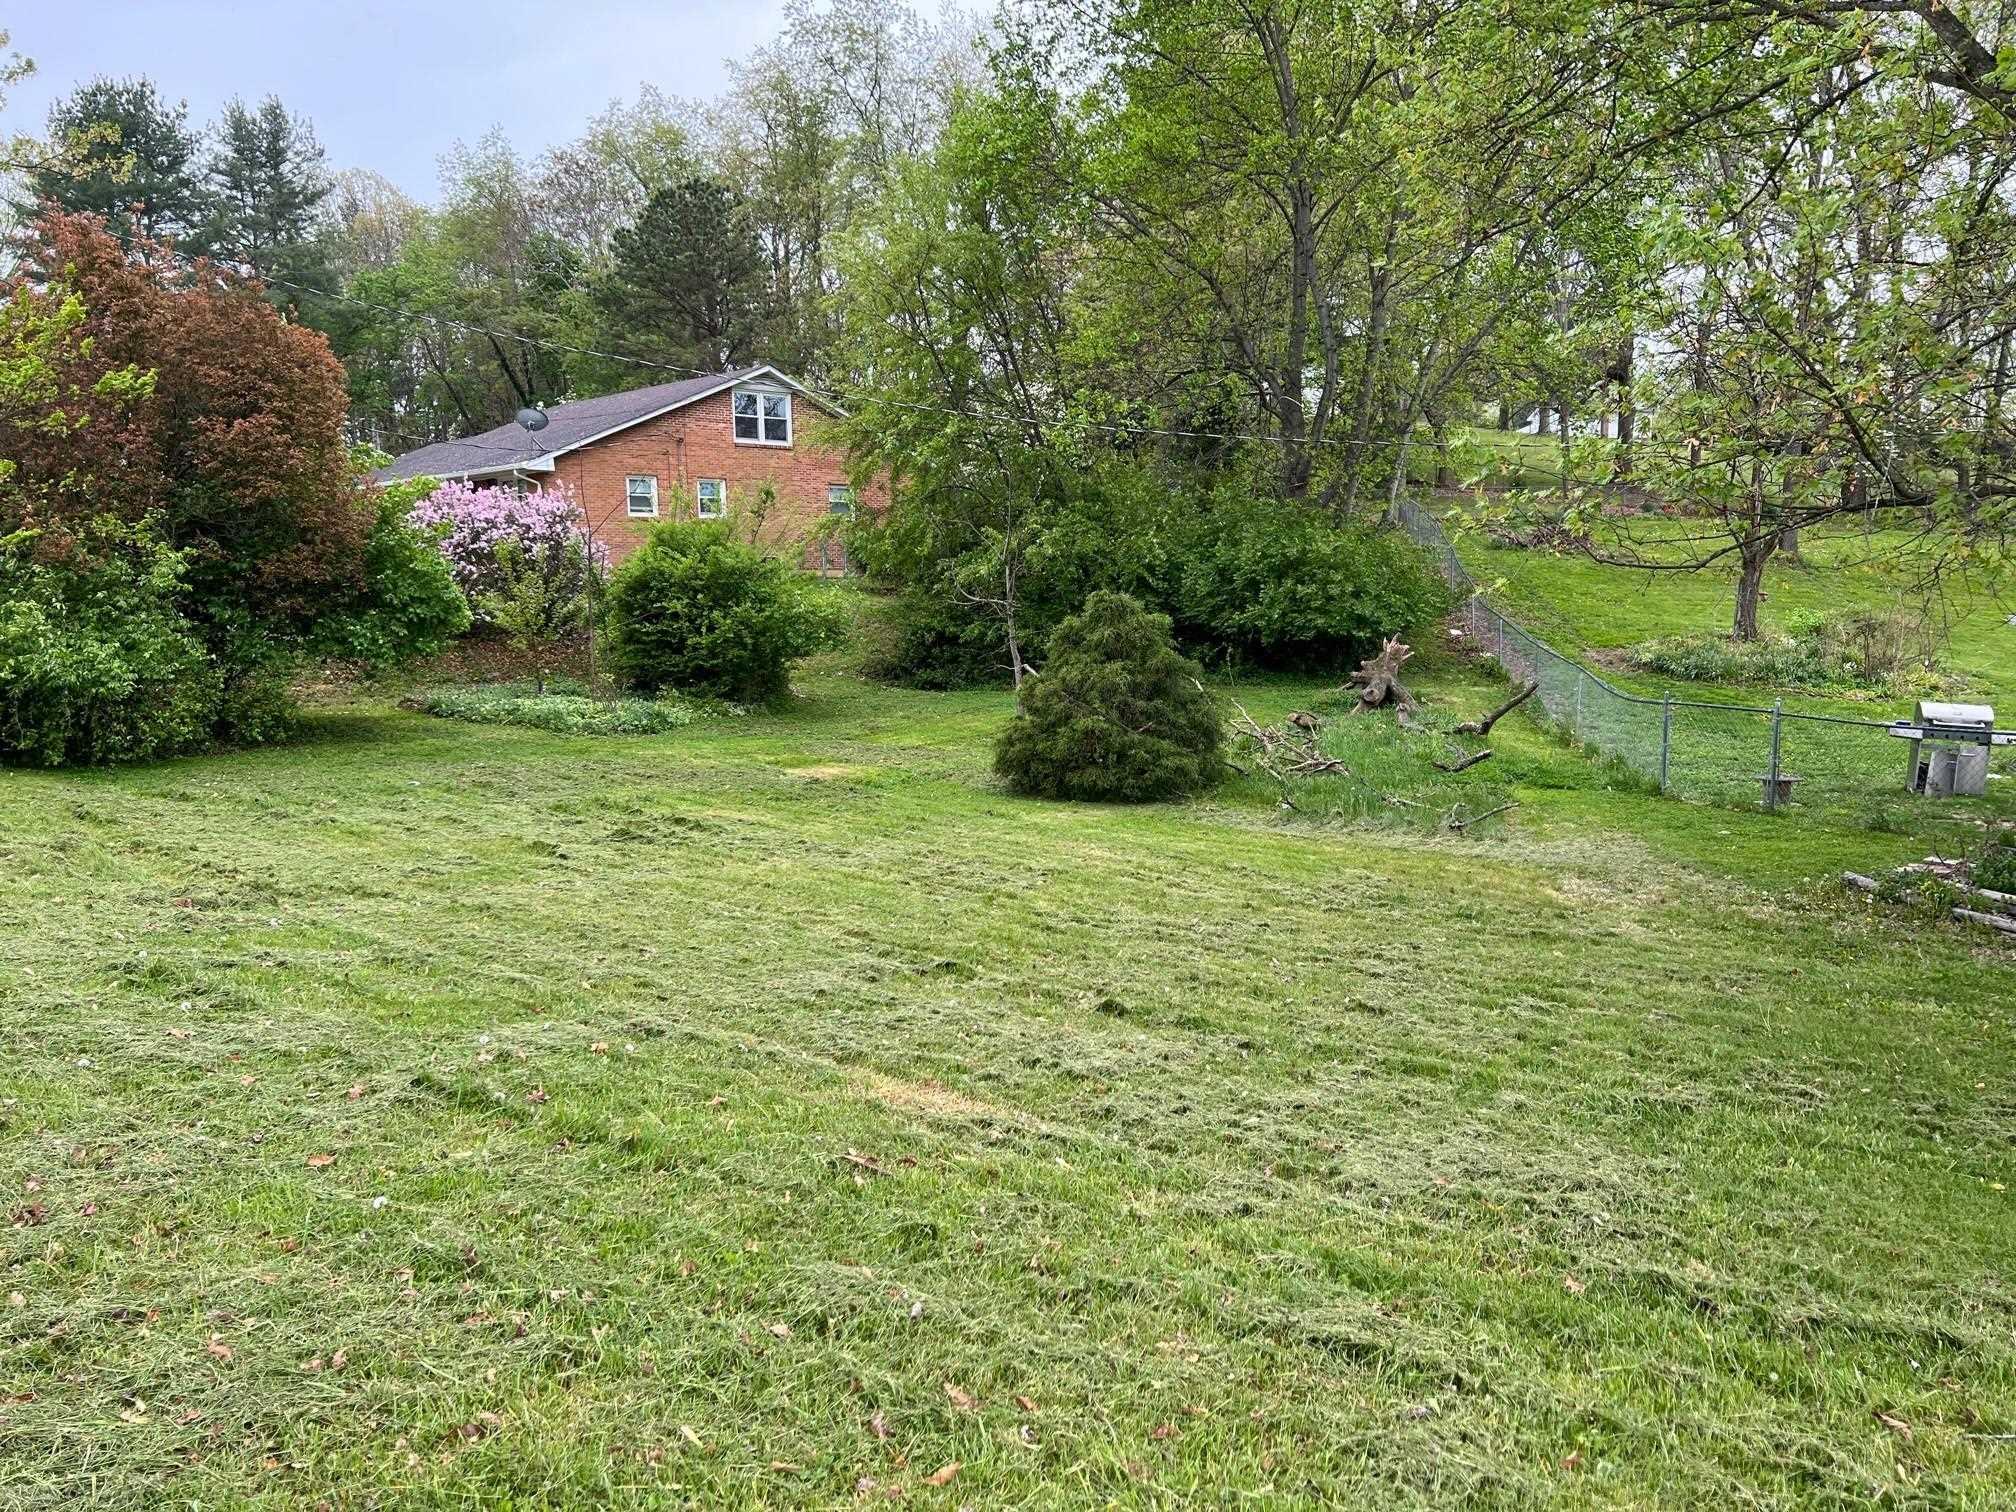 Nice 0.178 Acre lot in the City of Radford- ready for you to build on! Partially fenced. See documents for examples of possible houses that will fit beautifully on this lot. Zoned R-3